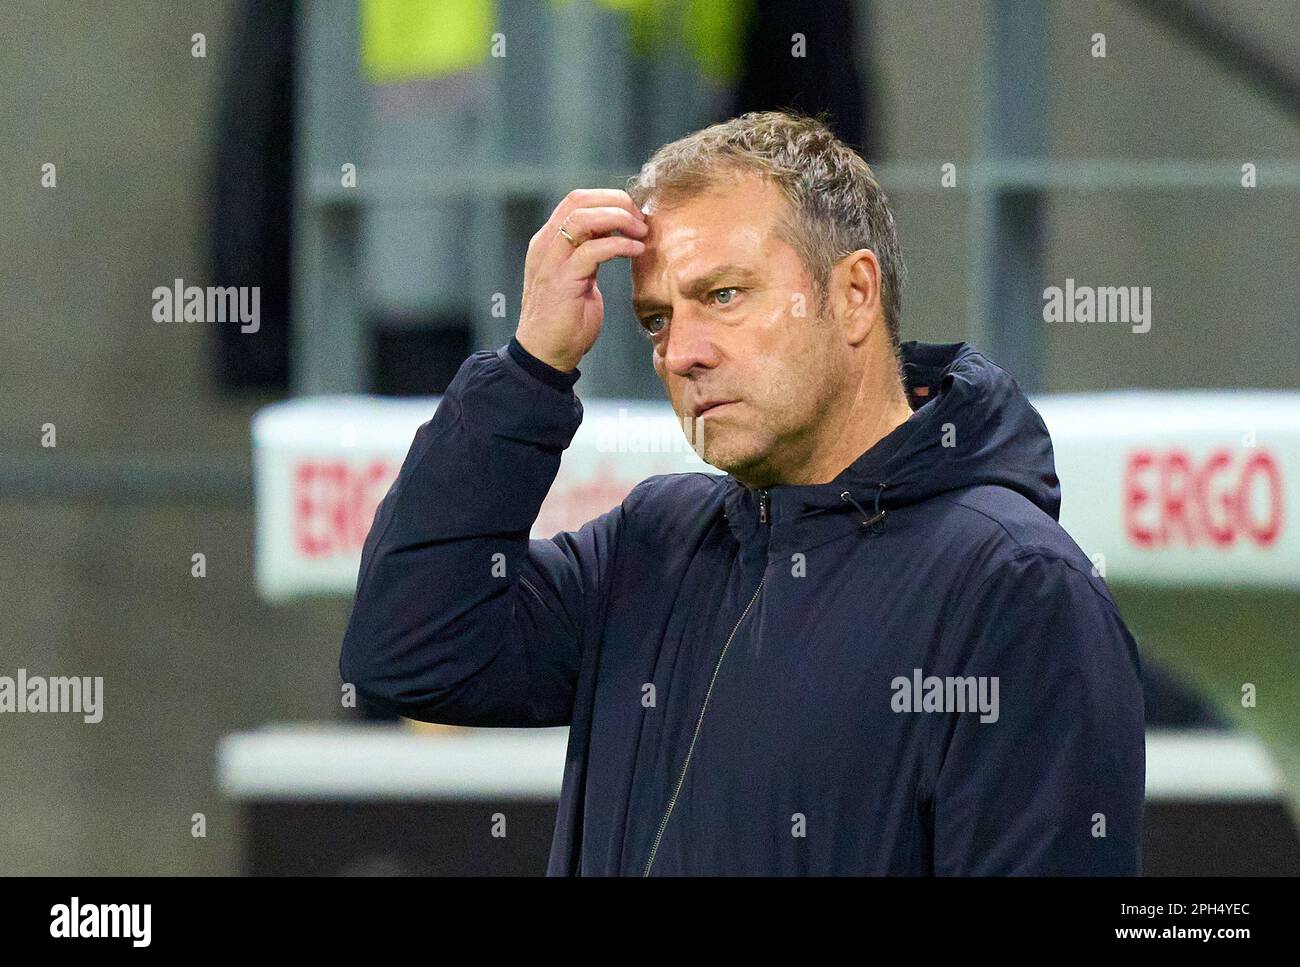 DFB headcoach Hans-Dieter Hansi Flick , Bundestrainer, Nationaltrainer,  in the friendly match GERMANY - PERU 2-0 Preparation for European Championships 2024 in Germany ,Season 2022/2023, on Mar 25, 2023  in Mainz, Germany.  © Peter Schatz / Alamy Live News Stock Photo